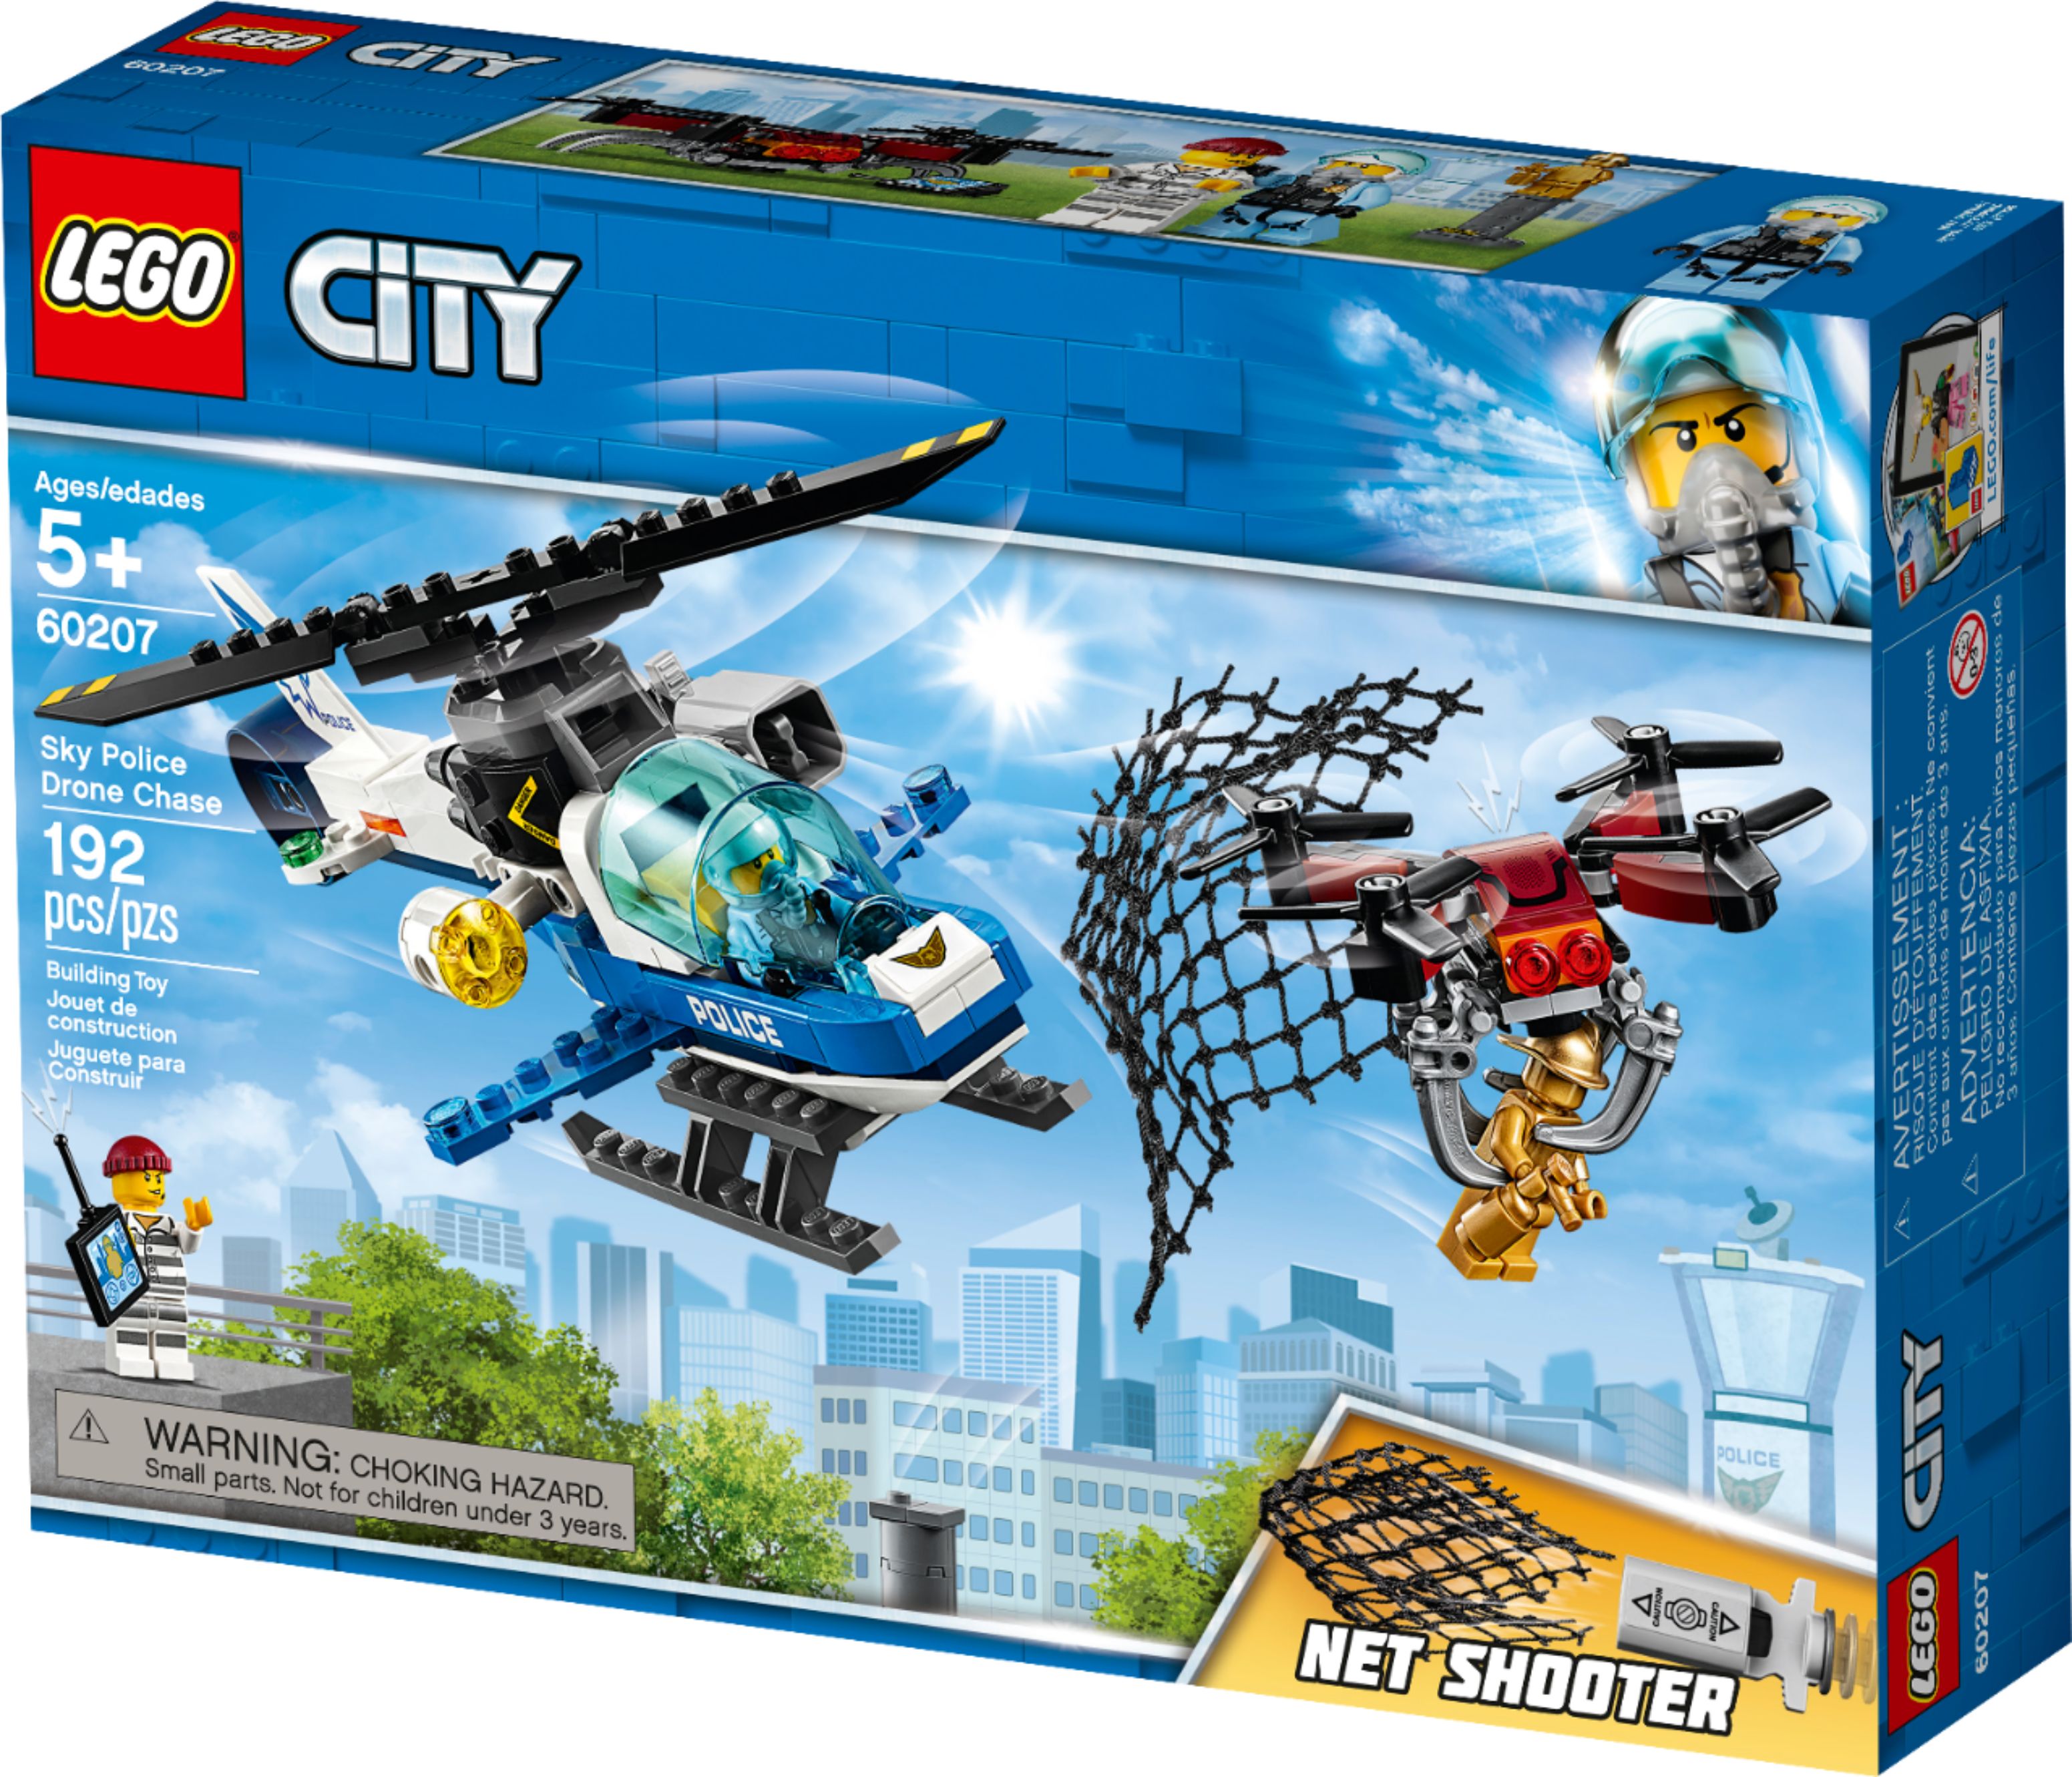 60207 Lego City Sky Police Drone Chase New Unopened Building Bricks Kids Toys 